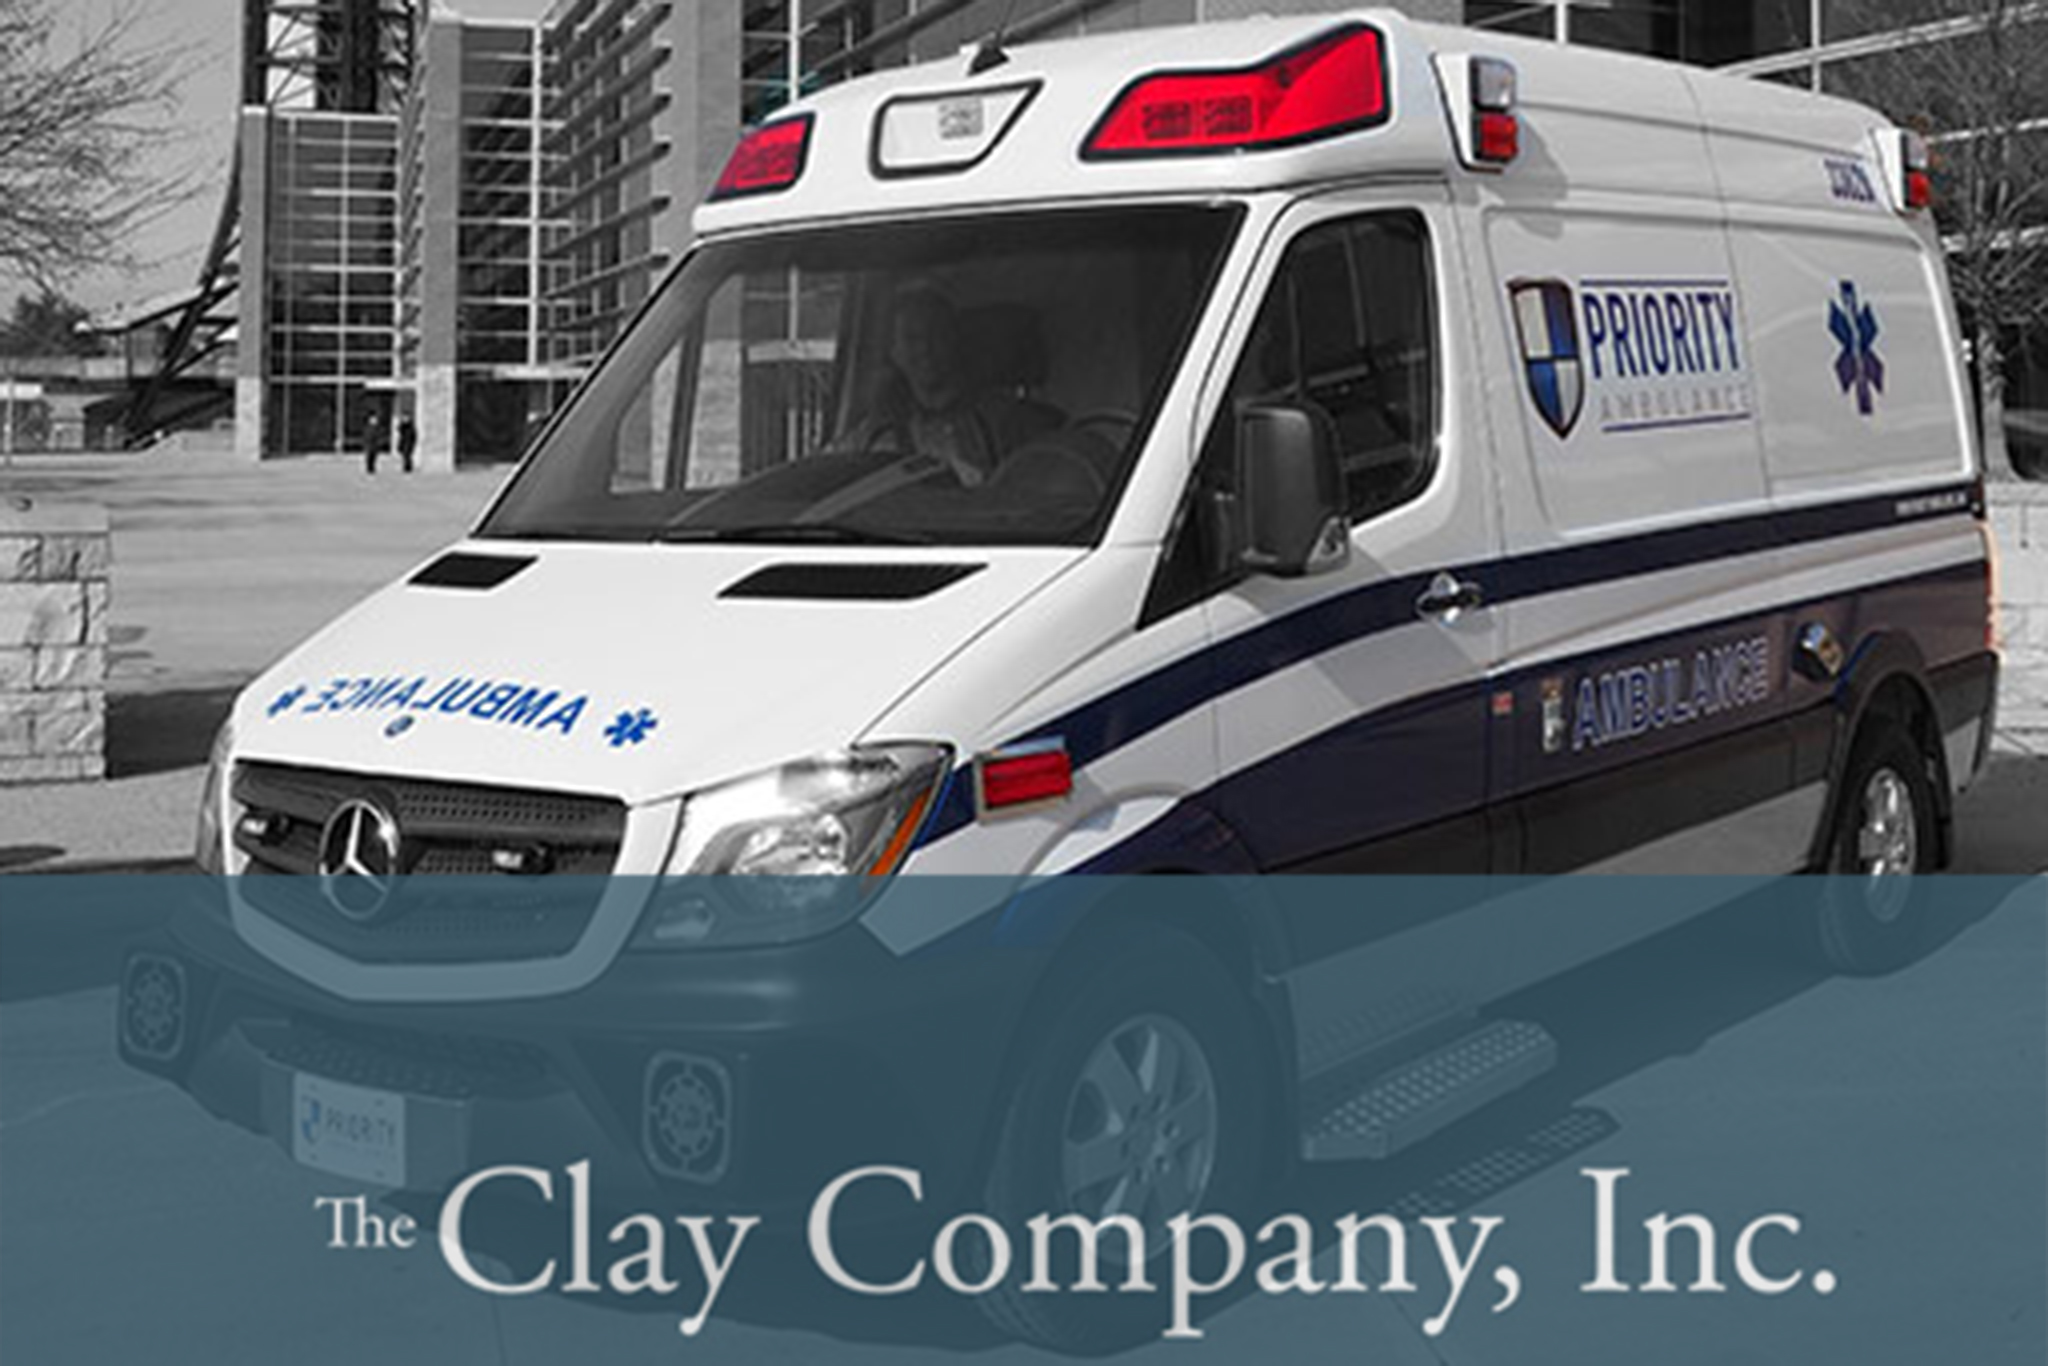 Tennessee Ambulance Company Hires Clay And Mercury To Hustle San Diego Pols San Diego Reader